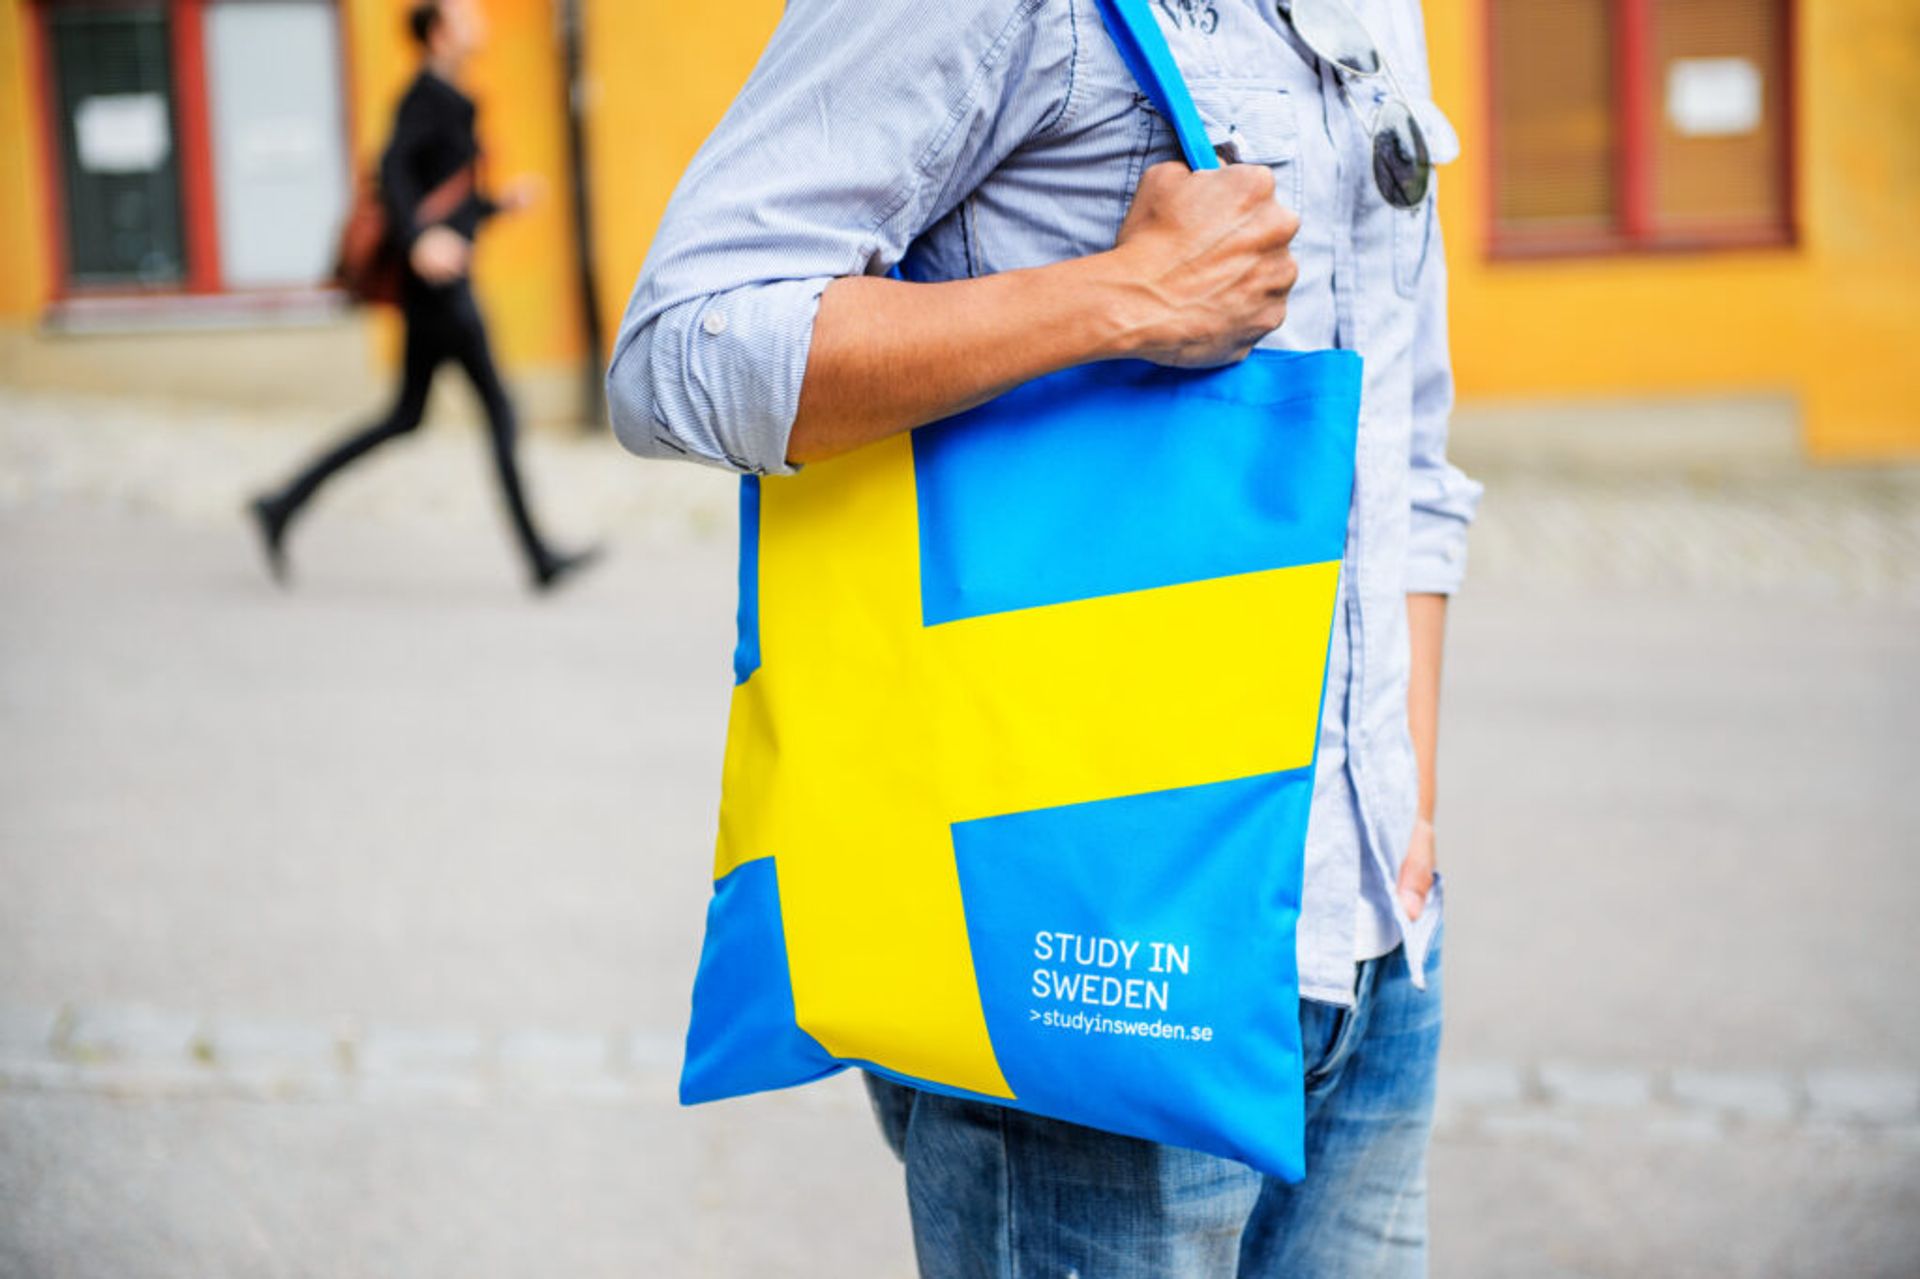 A person carrying a Study in Sweden totebag.